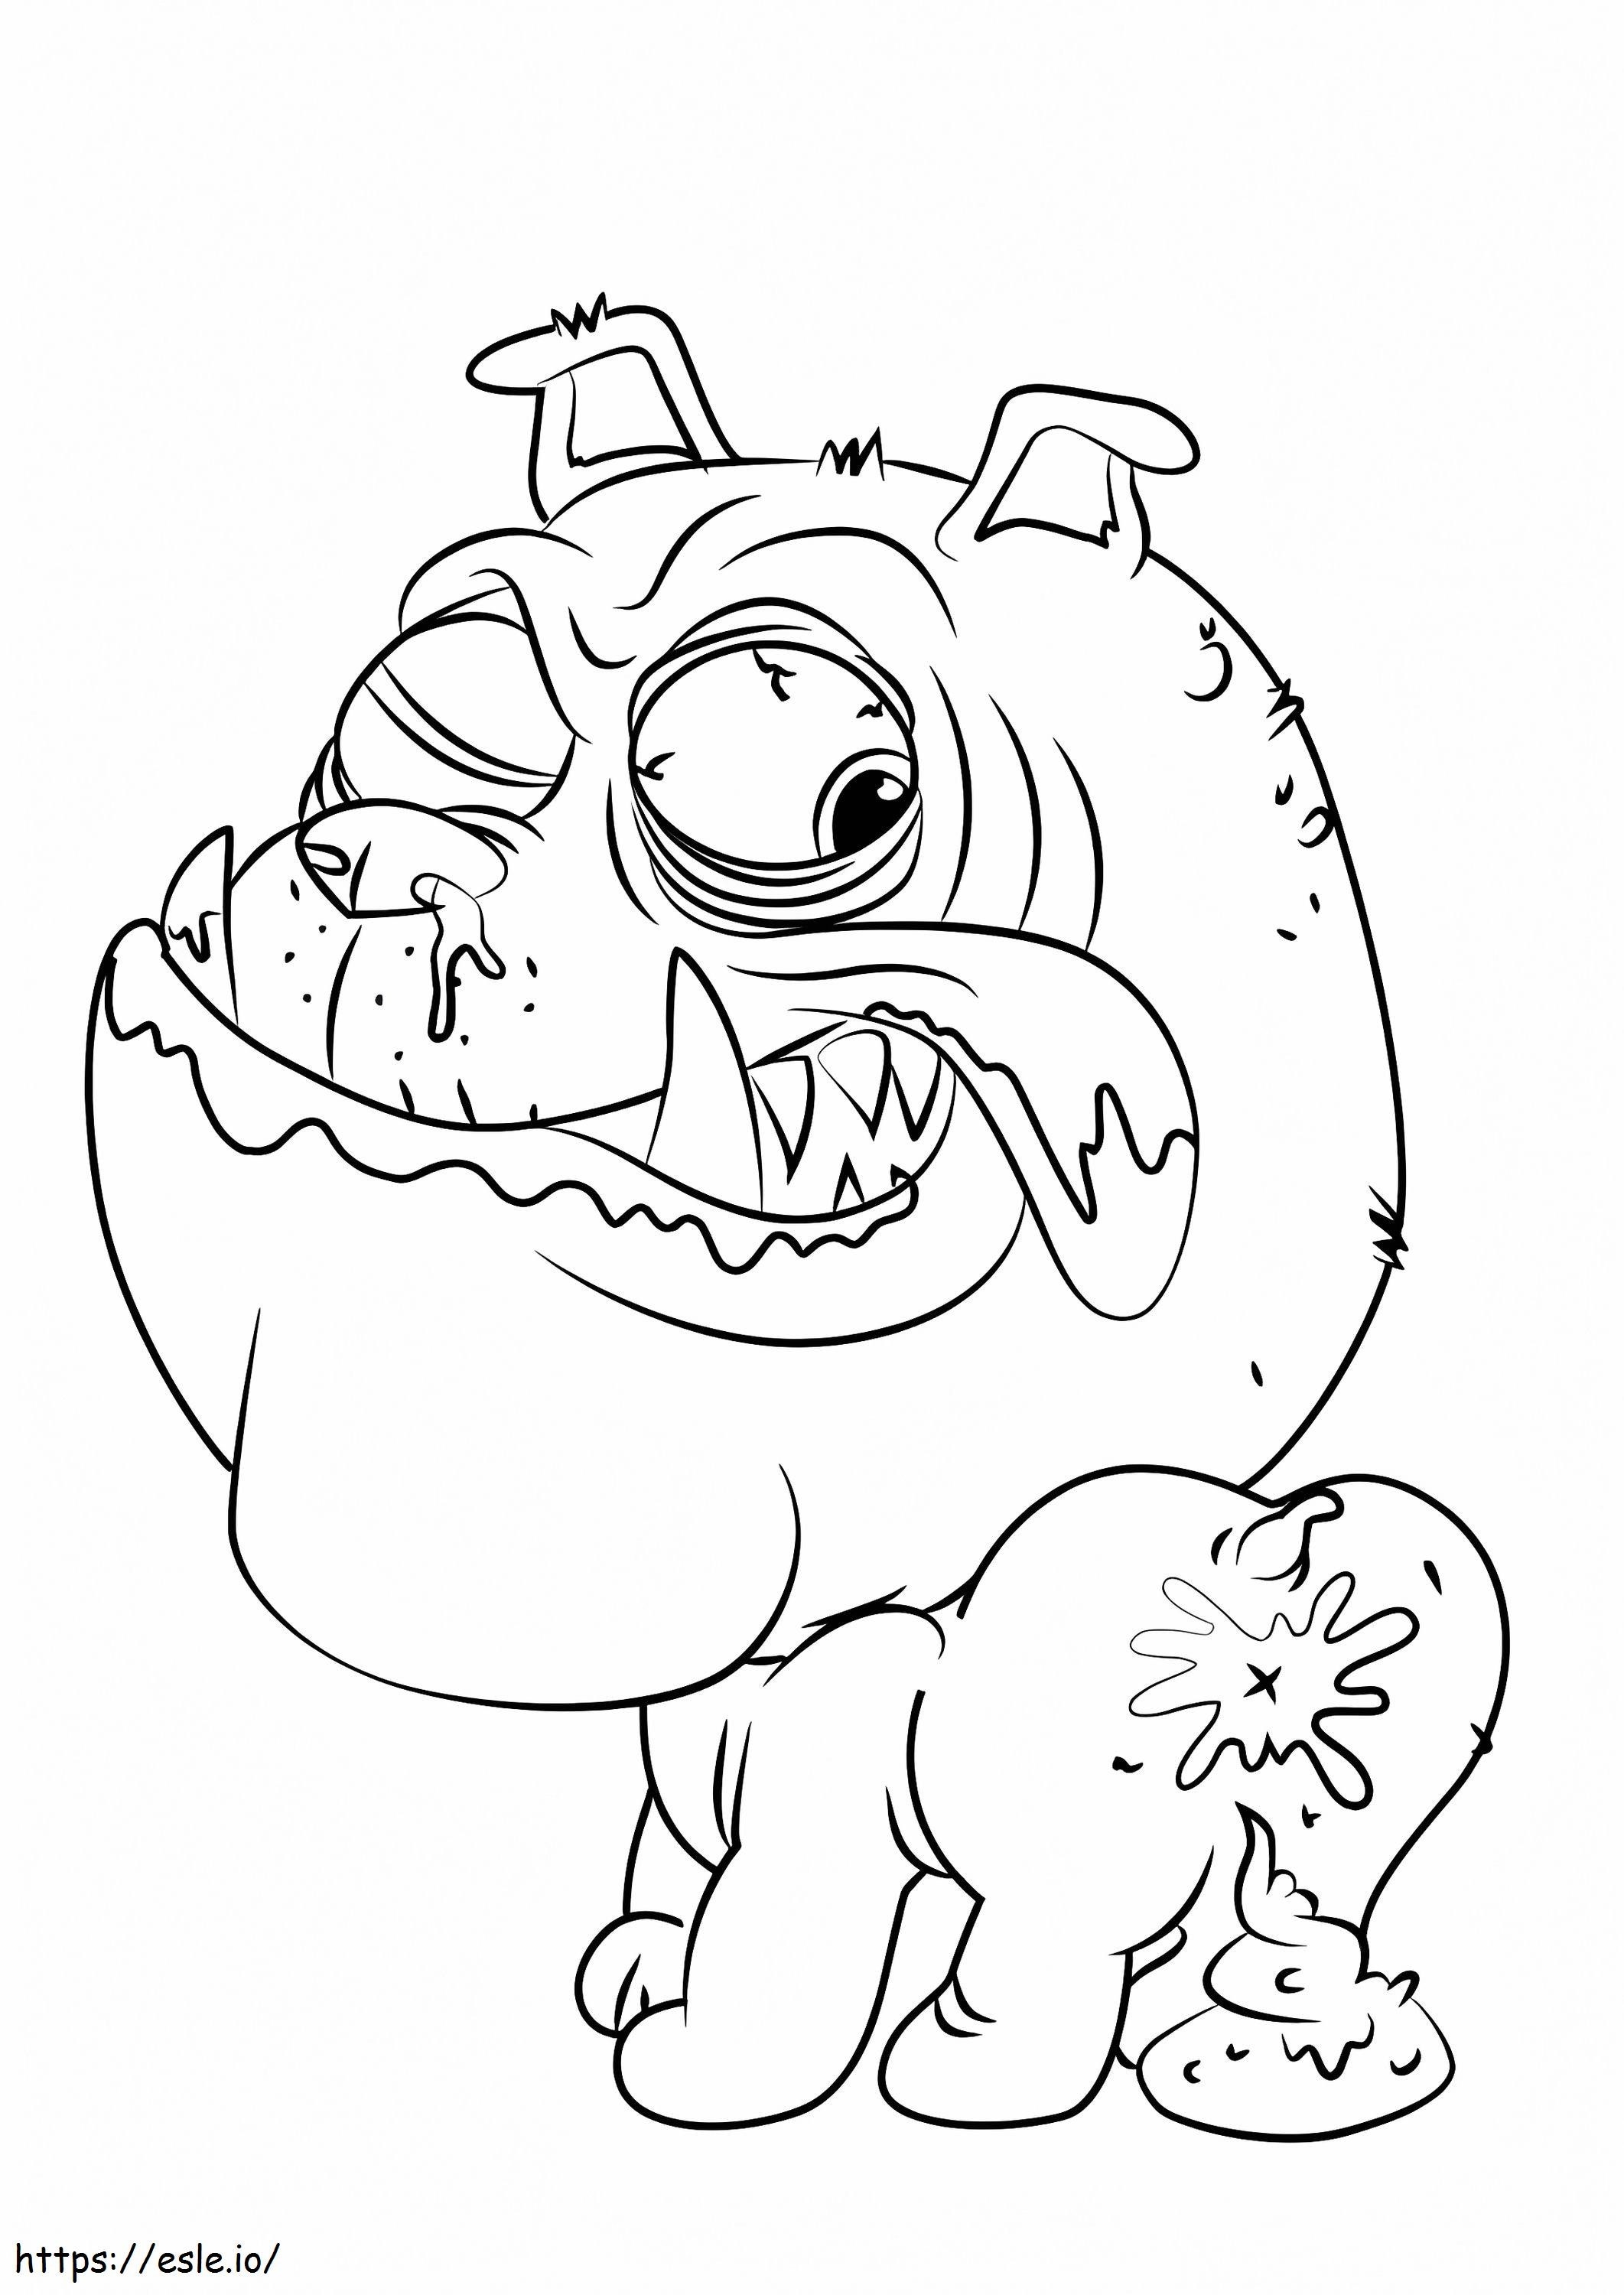 Blubbering Bulldog coloring page